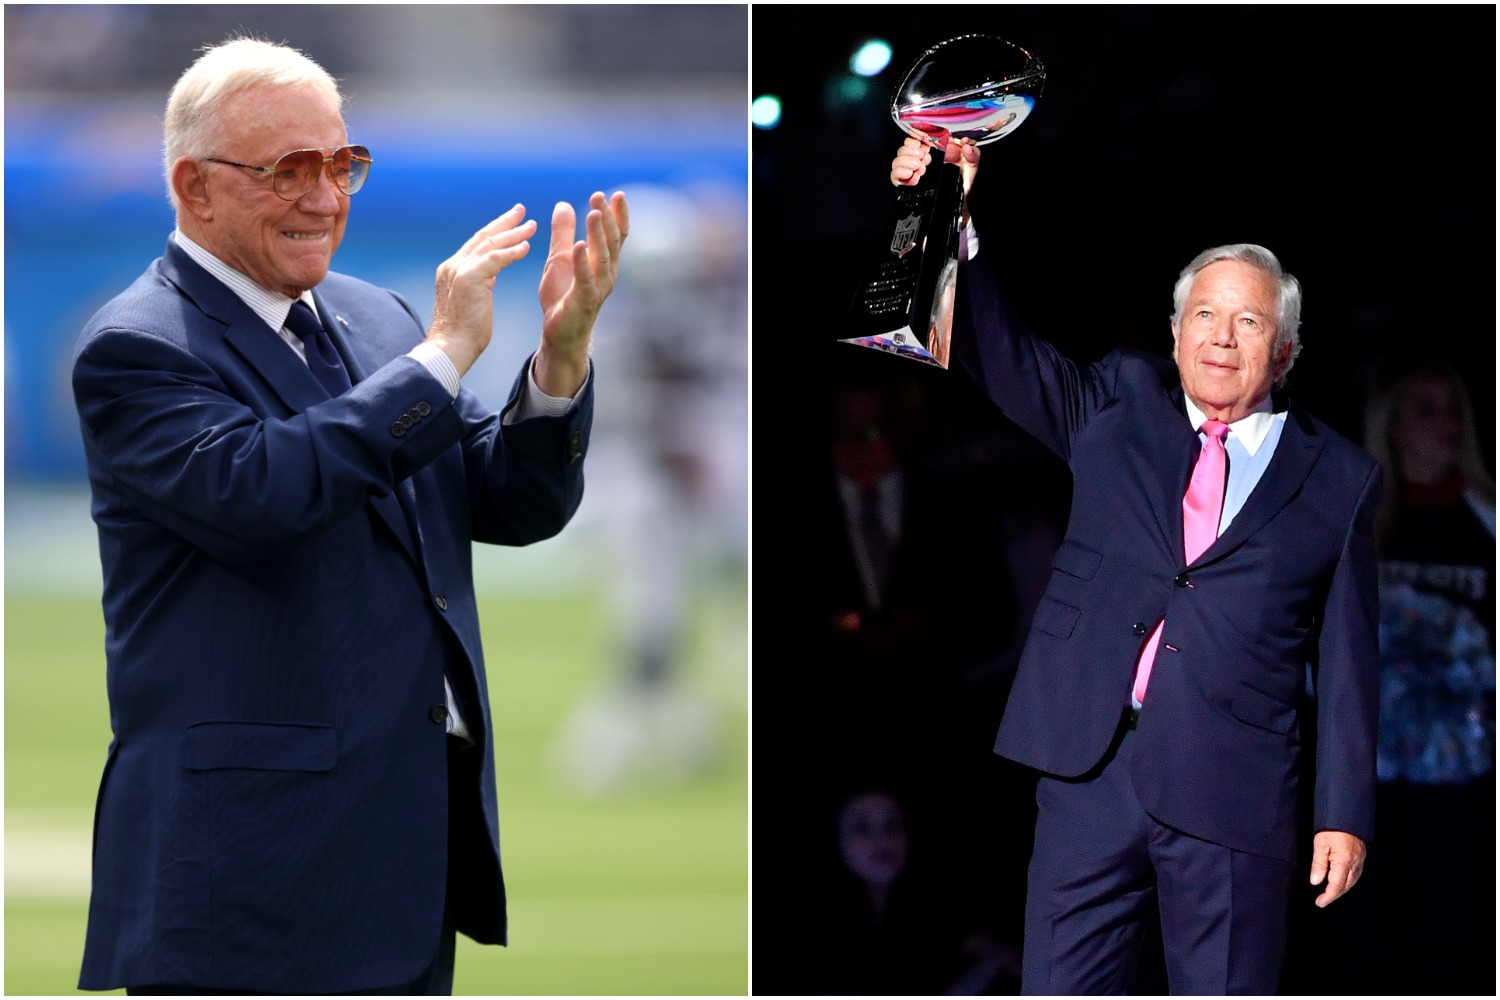 Dallas Cowboys owner Jerry Jones applauds his team as New England Patriots owner Robert Kraft lifts the Lombardi Trophy in the air.